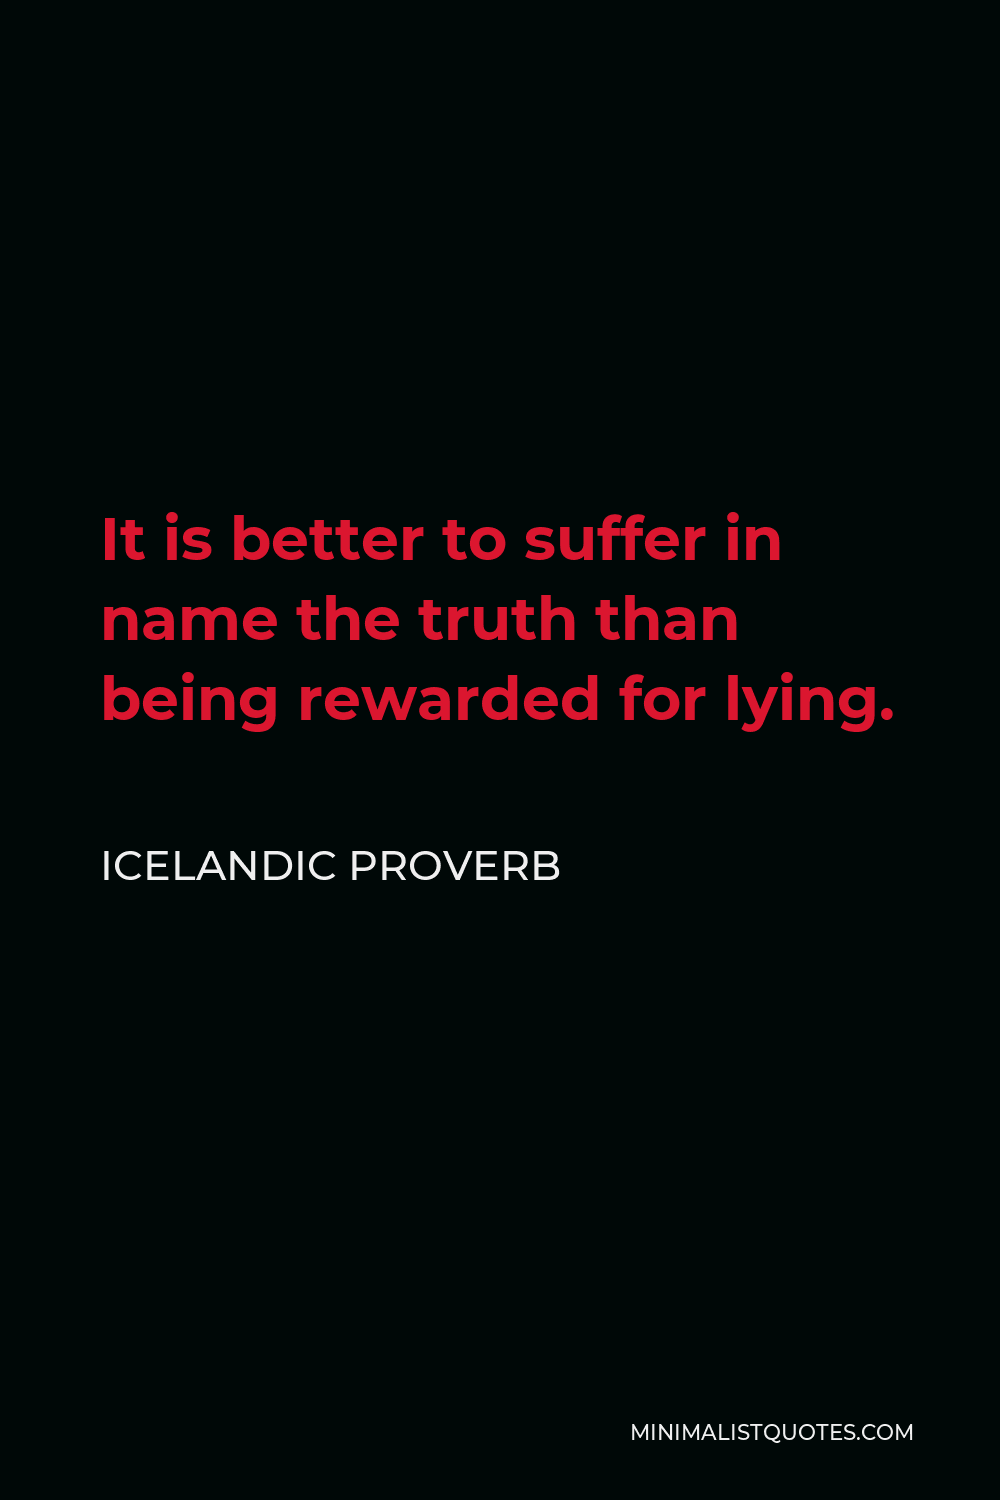 Icelandic Proverb Quote - It is better to suffer in name the truth than being rewarded for lying.